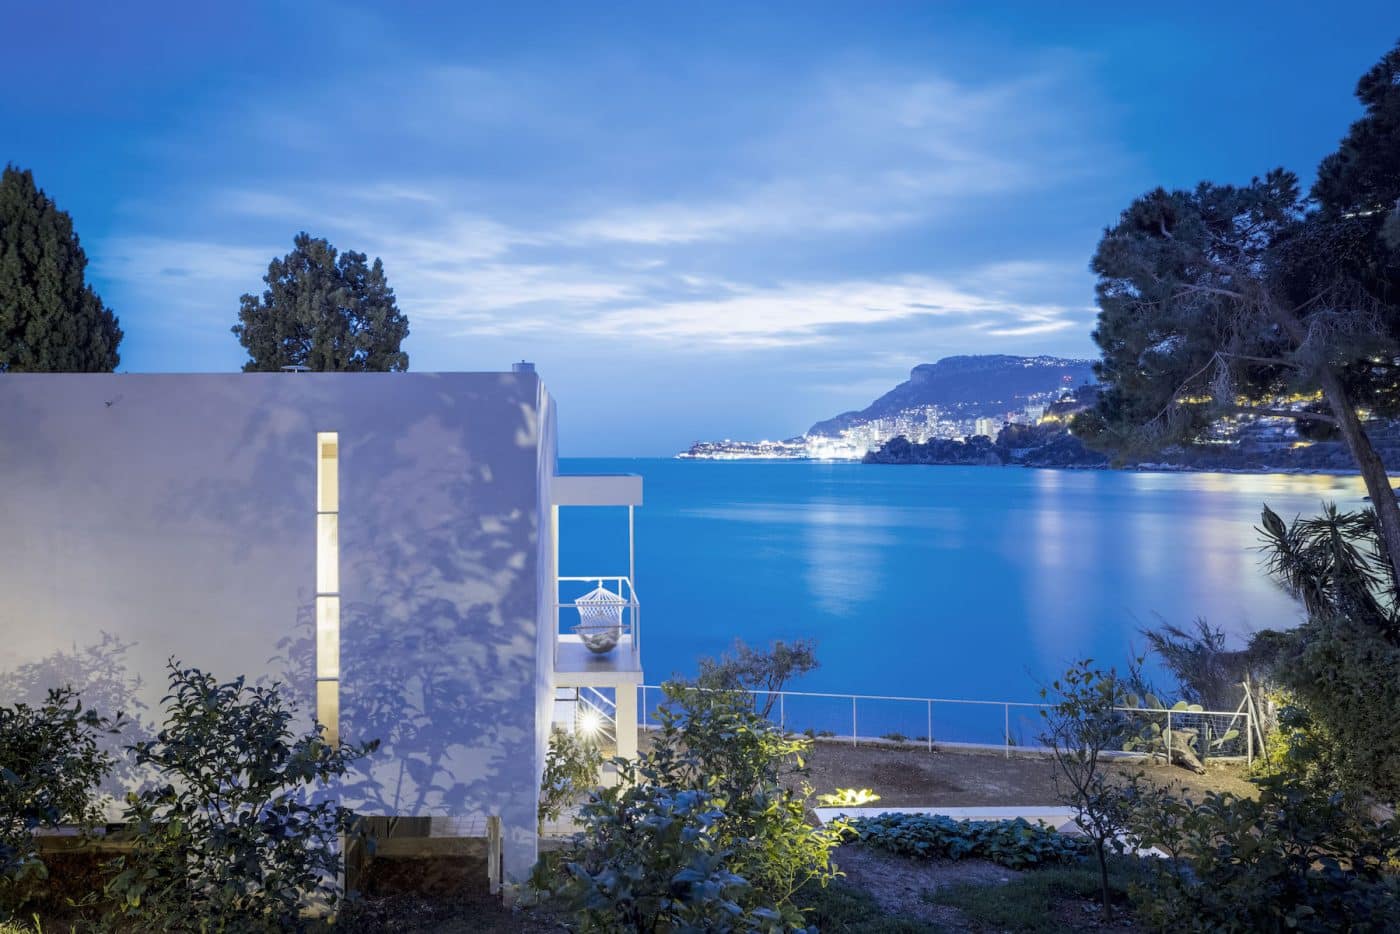 A twilight view of the Baie de Roquebrune and Monte Carlo from behind Eileen Gray's E-1027.